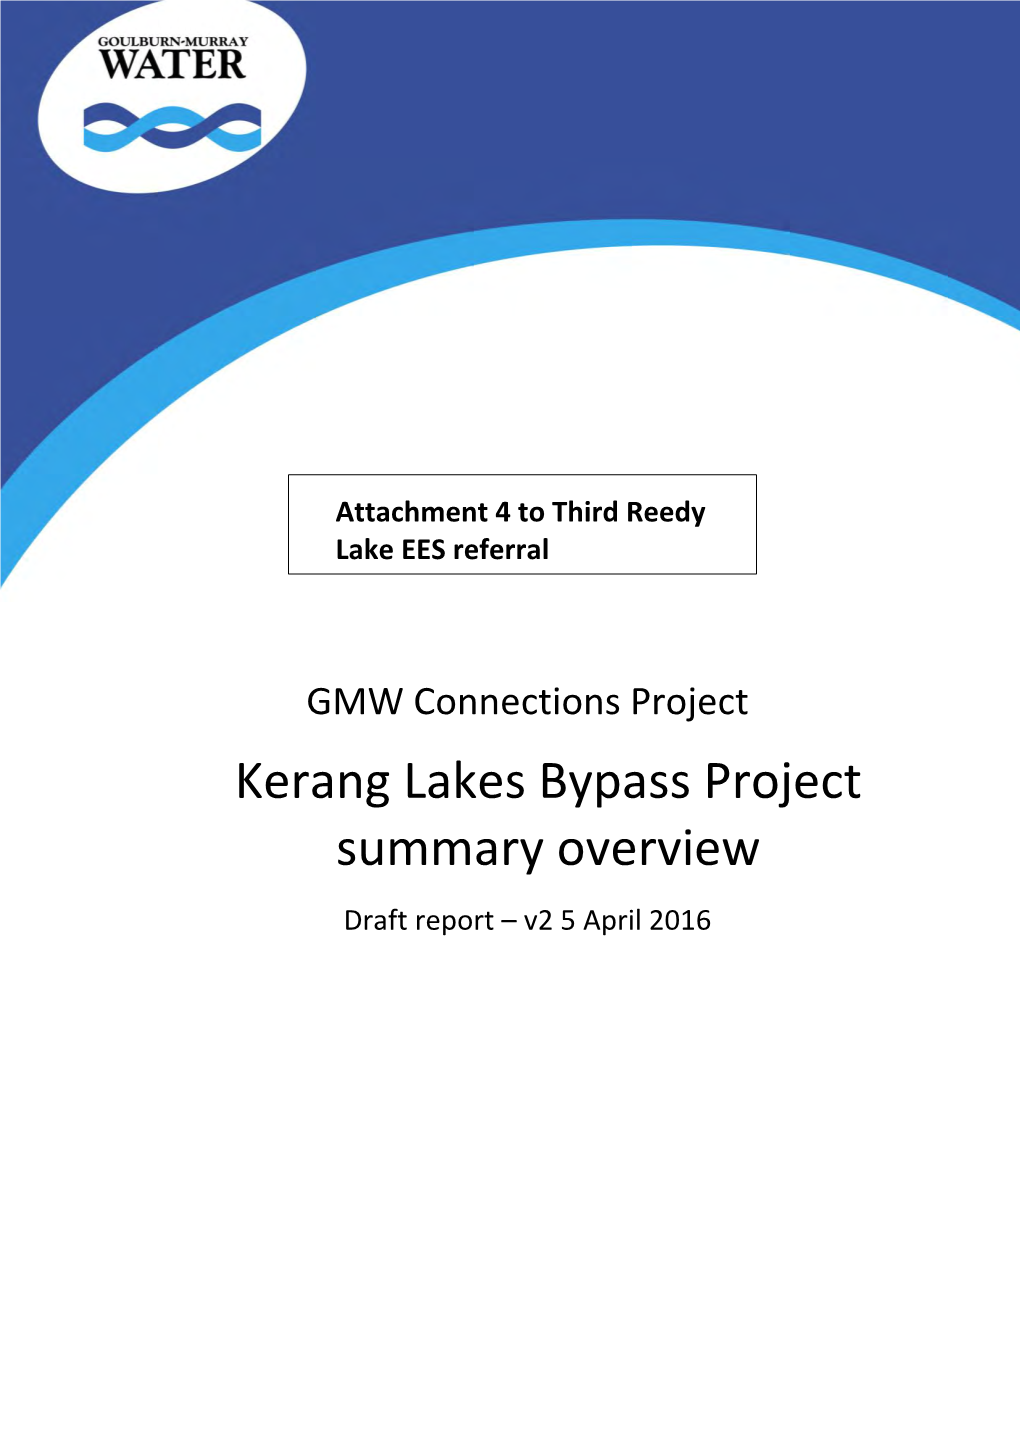 Kerang Lakes Bypass Project Summary Overview Draft Report – V2 5 April 2016